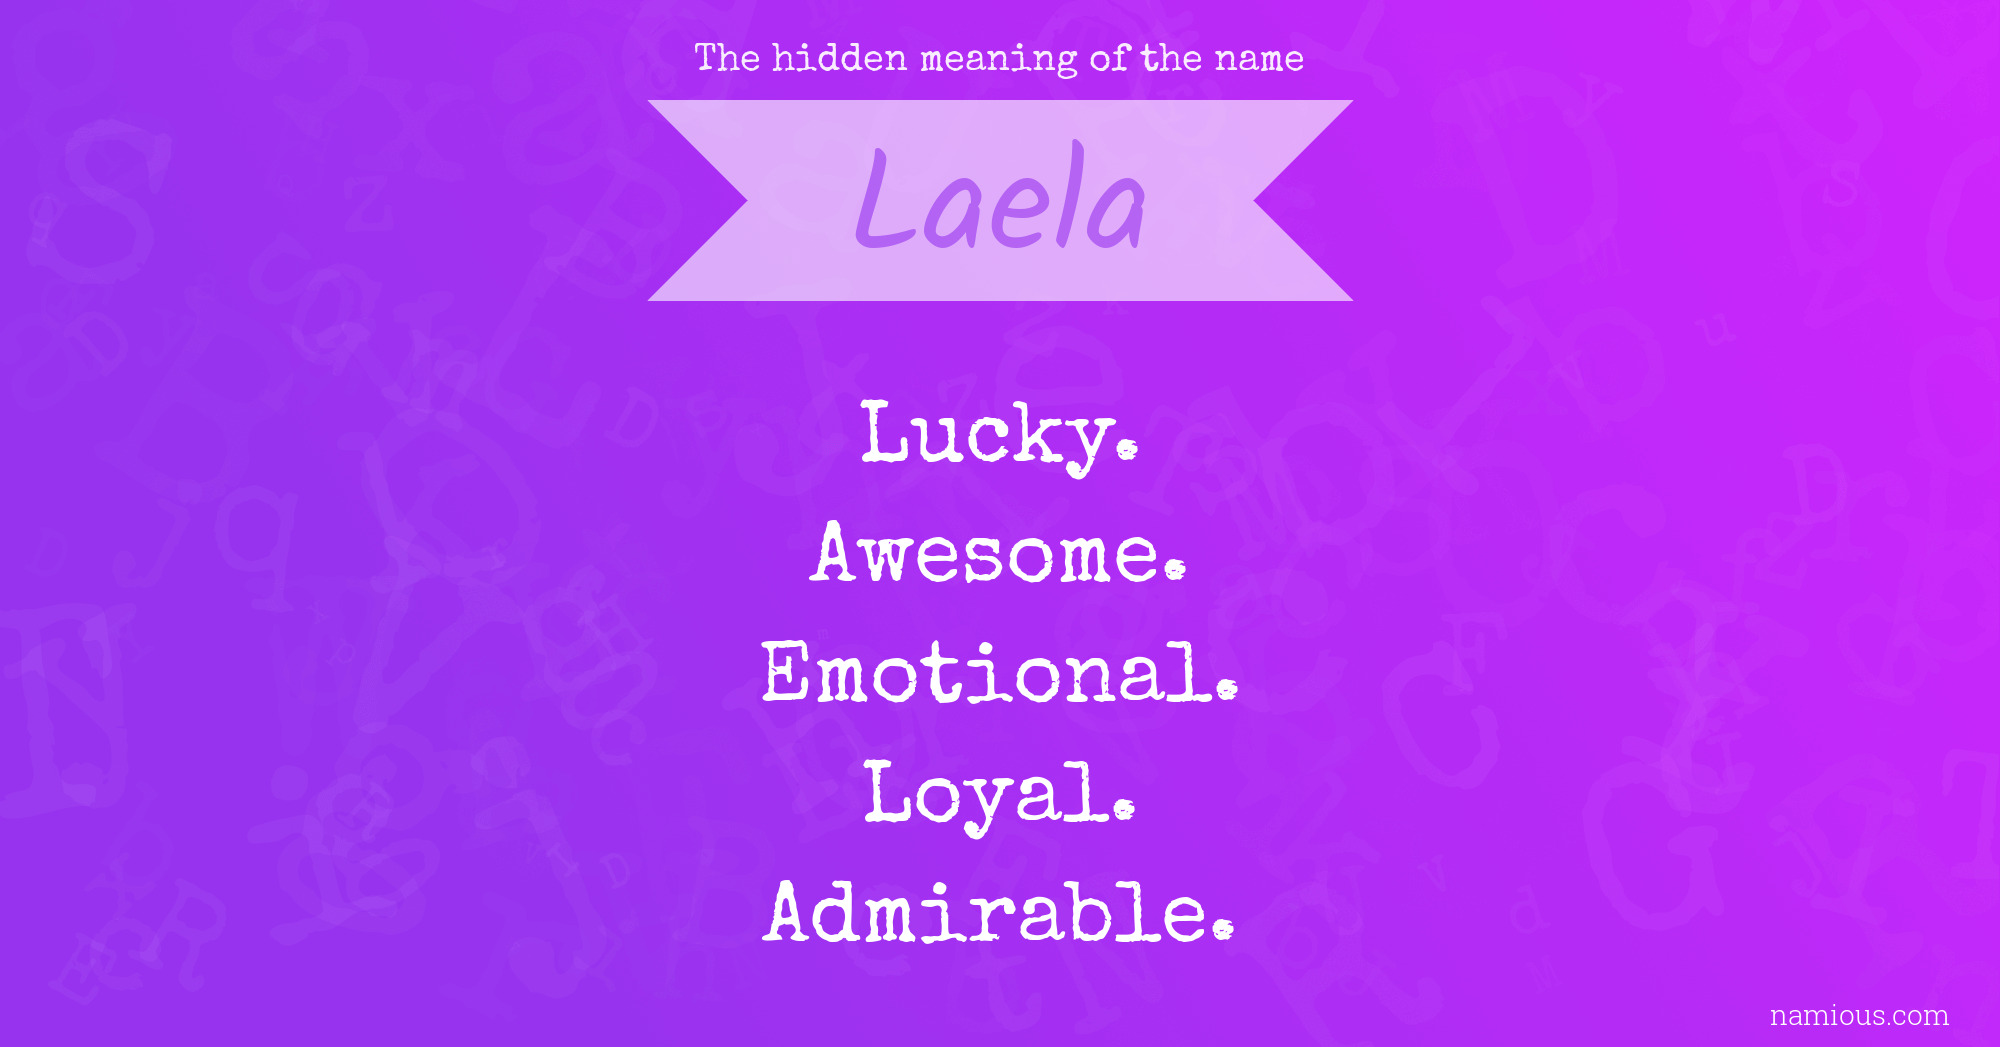 The hidden meaning of the name Laela